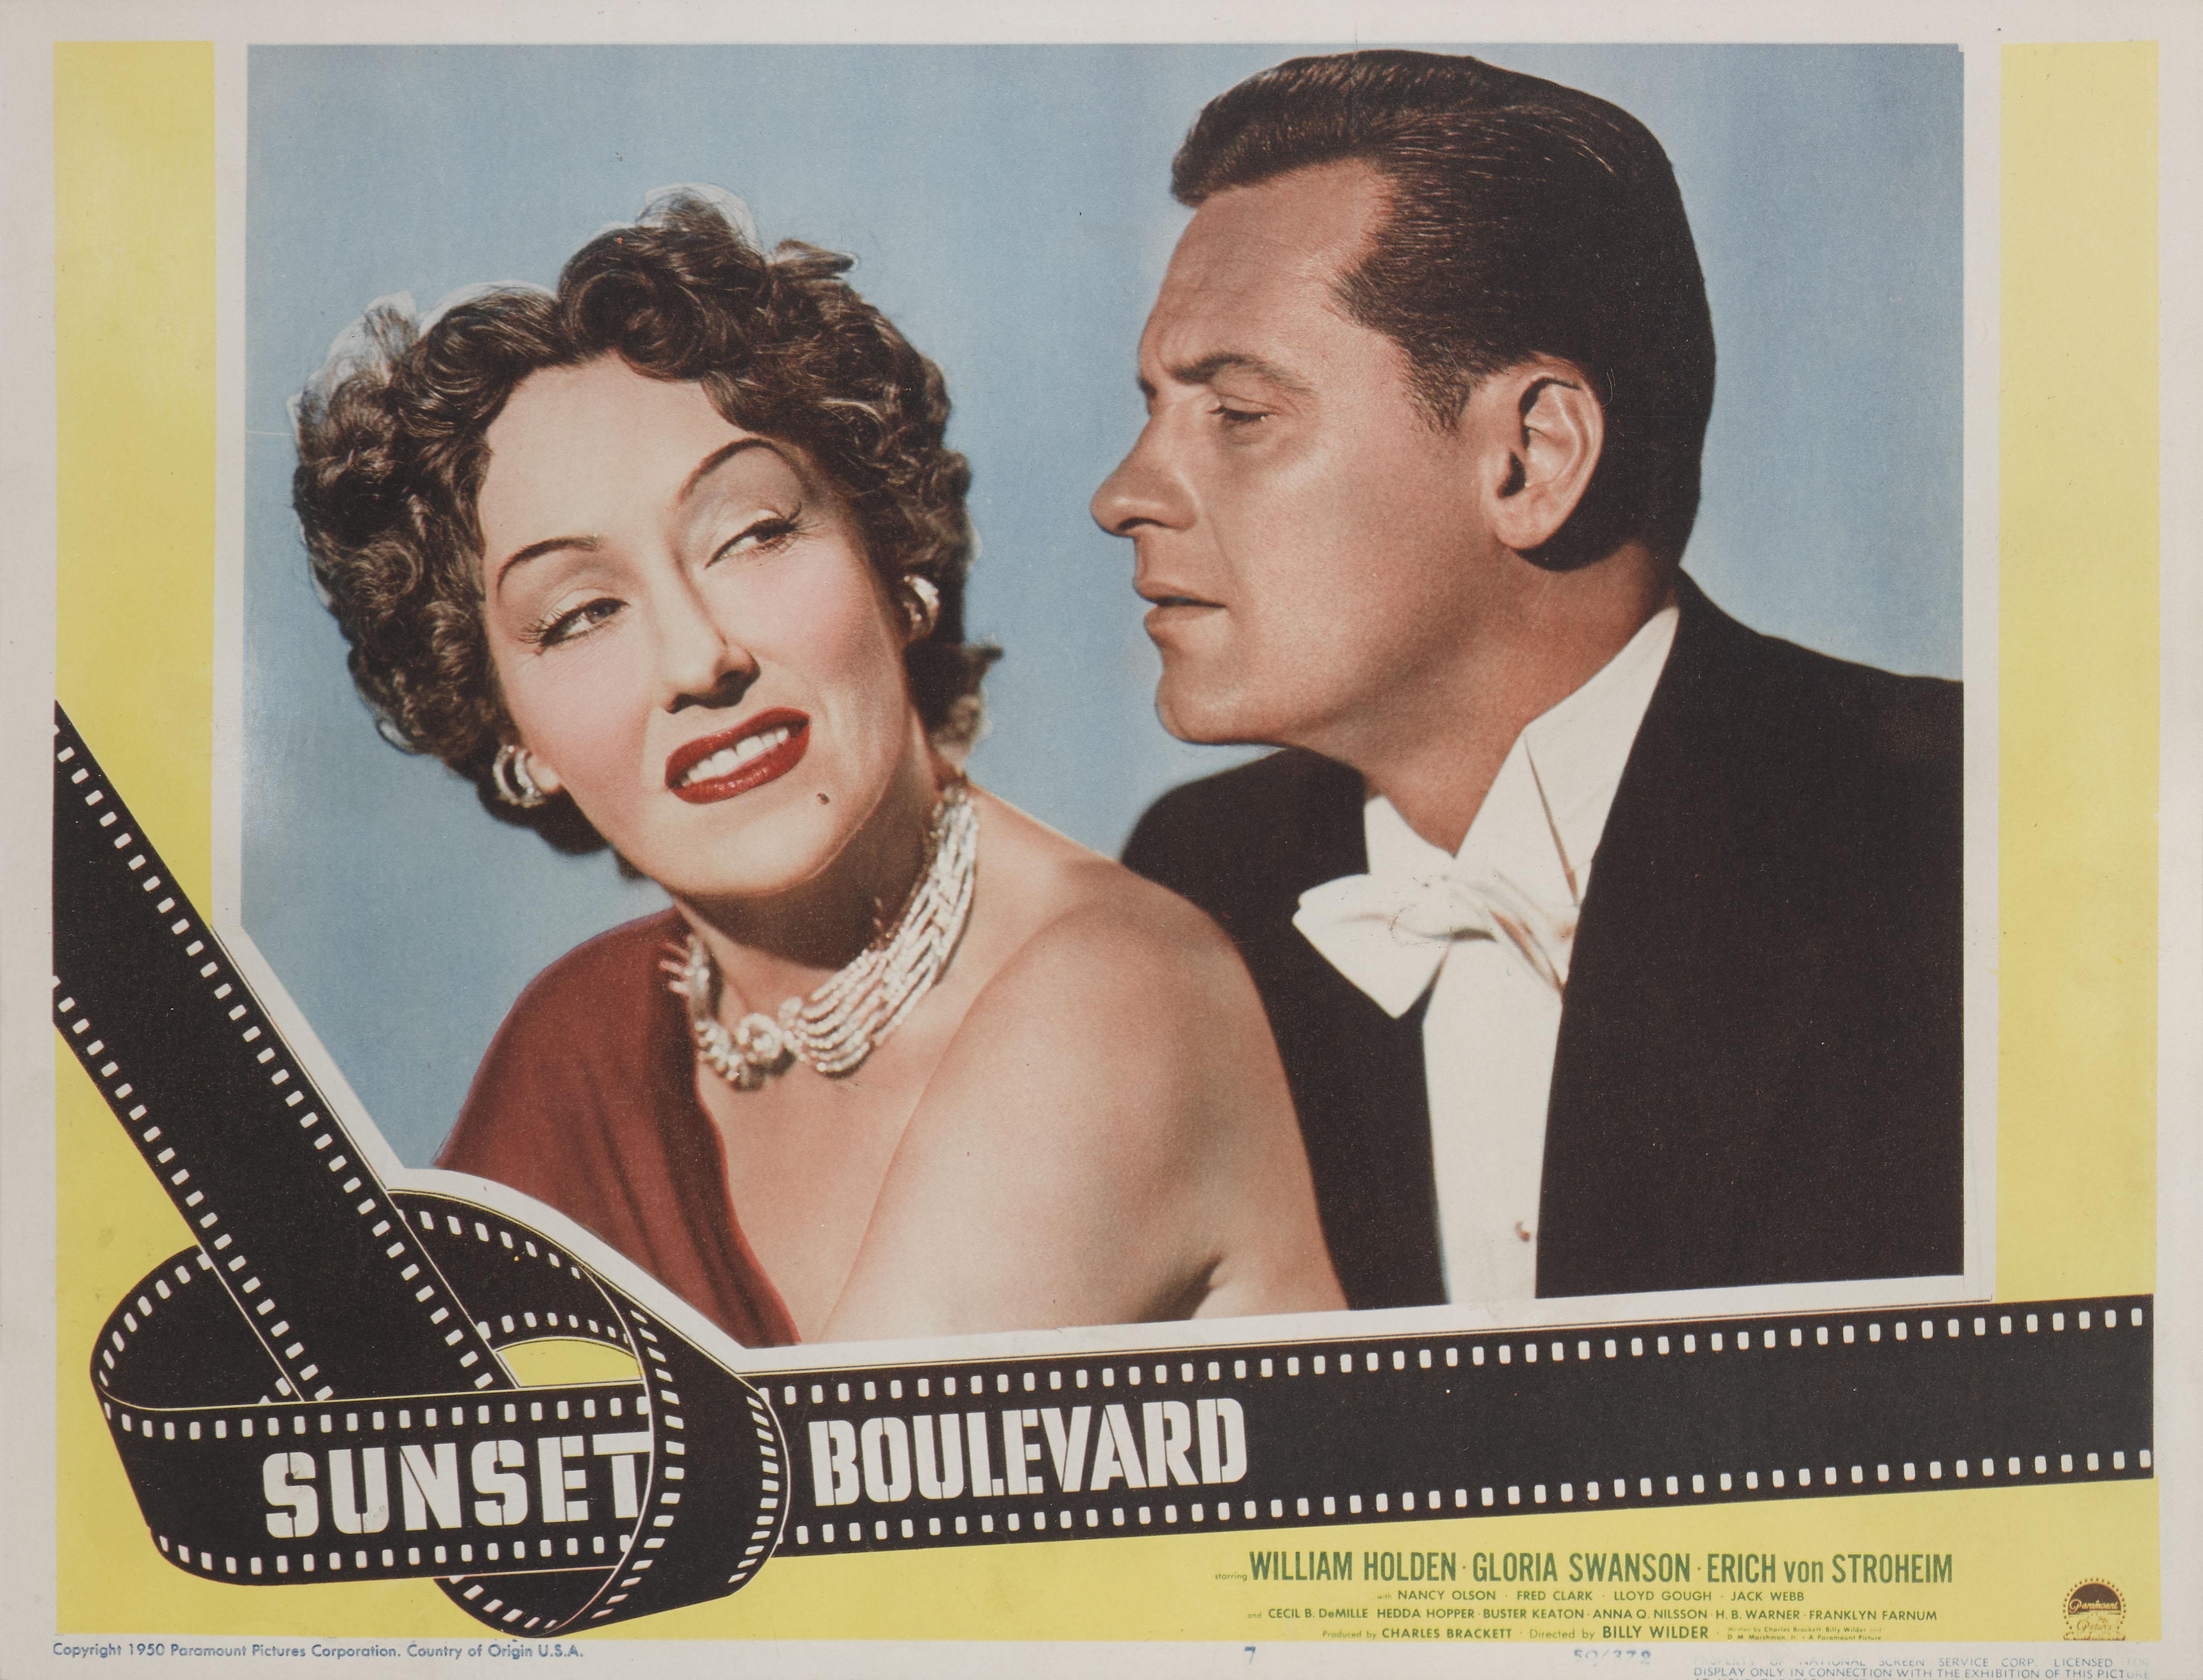 Original US lobby card number 7 for the American film noir directed and co-written by Billy Wilder, and produced and co-written by Charles Brackett. The film stars William Holden, Gloria Swanson and Errich von Stroheim. The film was nominated for